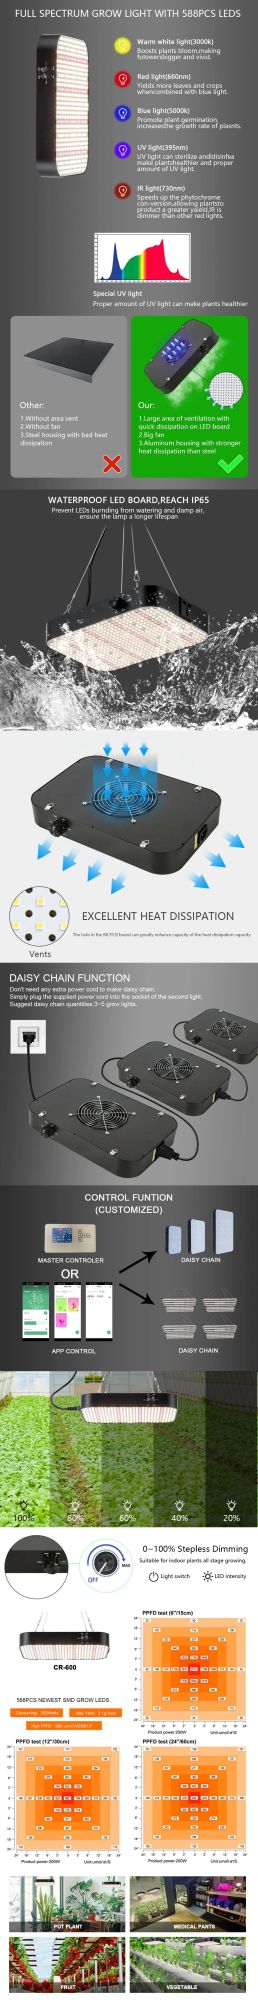 130W LED Grow Light, for Indoor Plants, Dimmable Full Spectrum Grow Light with APP Control Daisy Chain and Quiet Cooling Fan for Gardening Plan